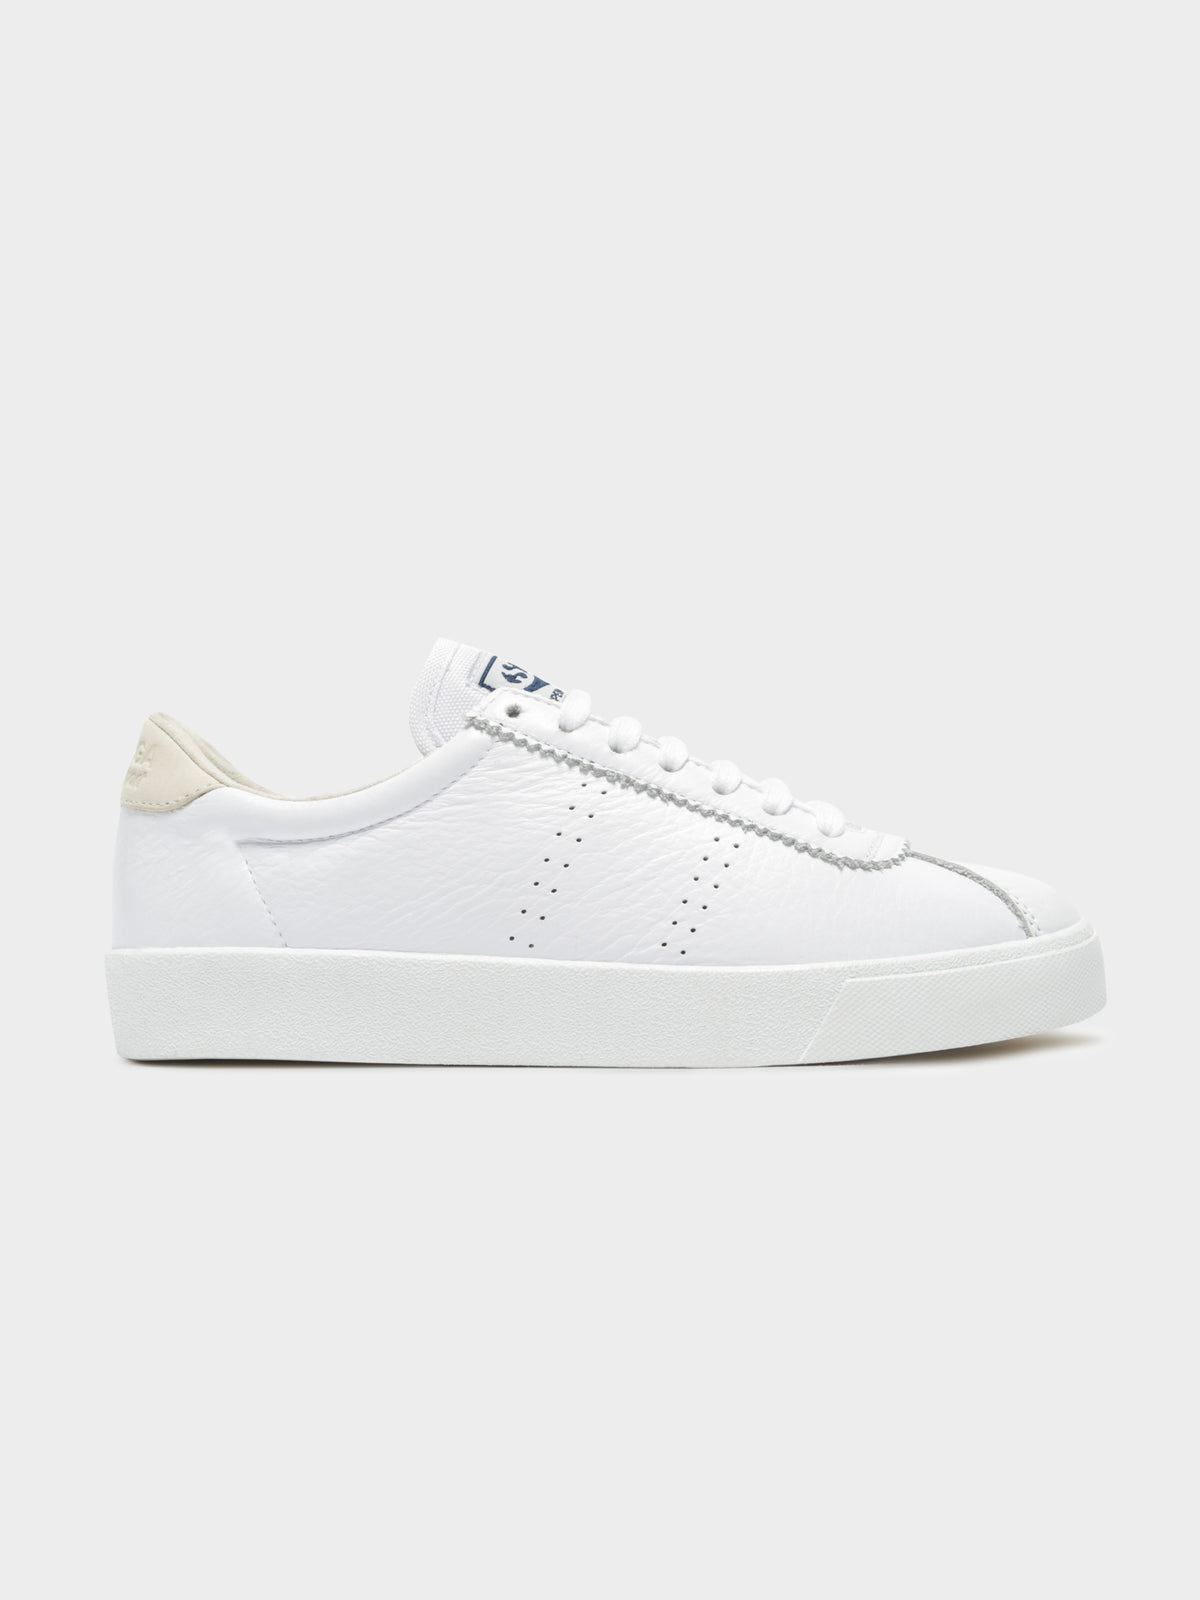 Unisex 2843 Club S Comfort Leather Sneakers in White